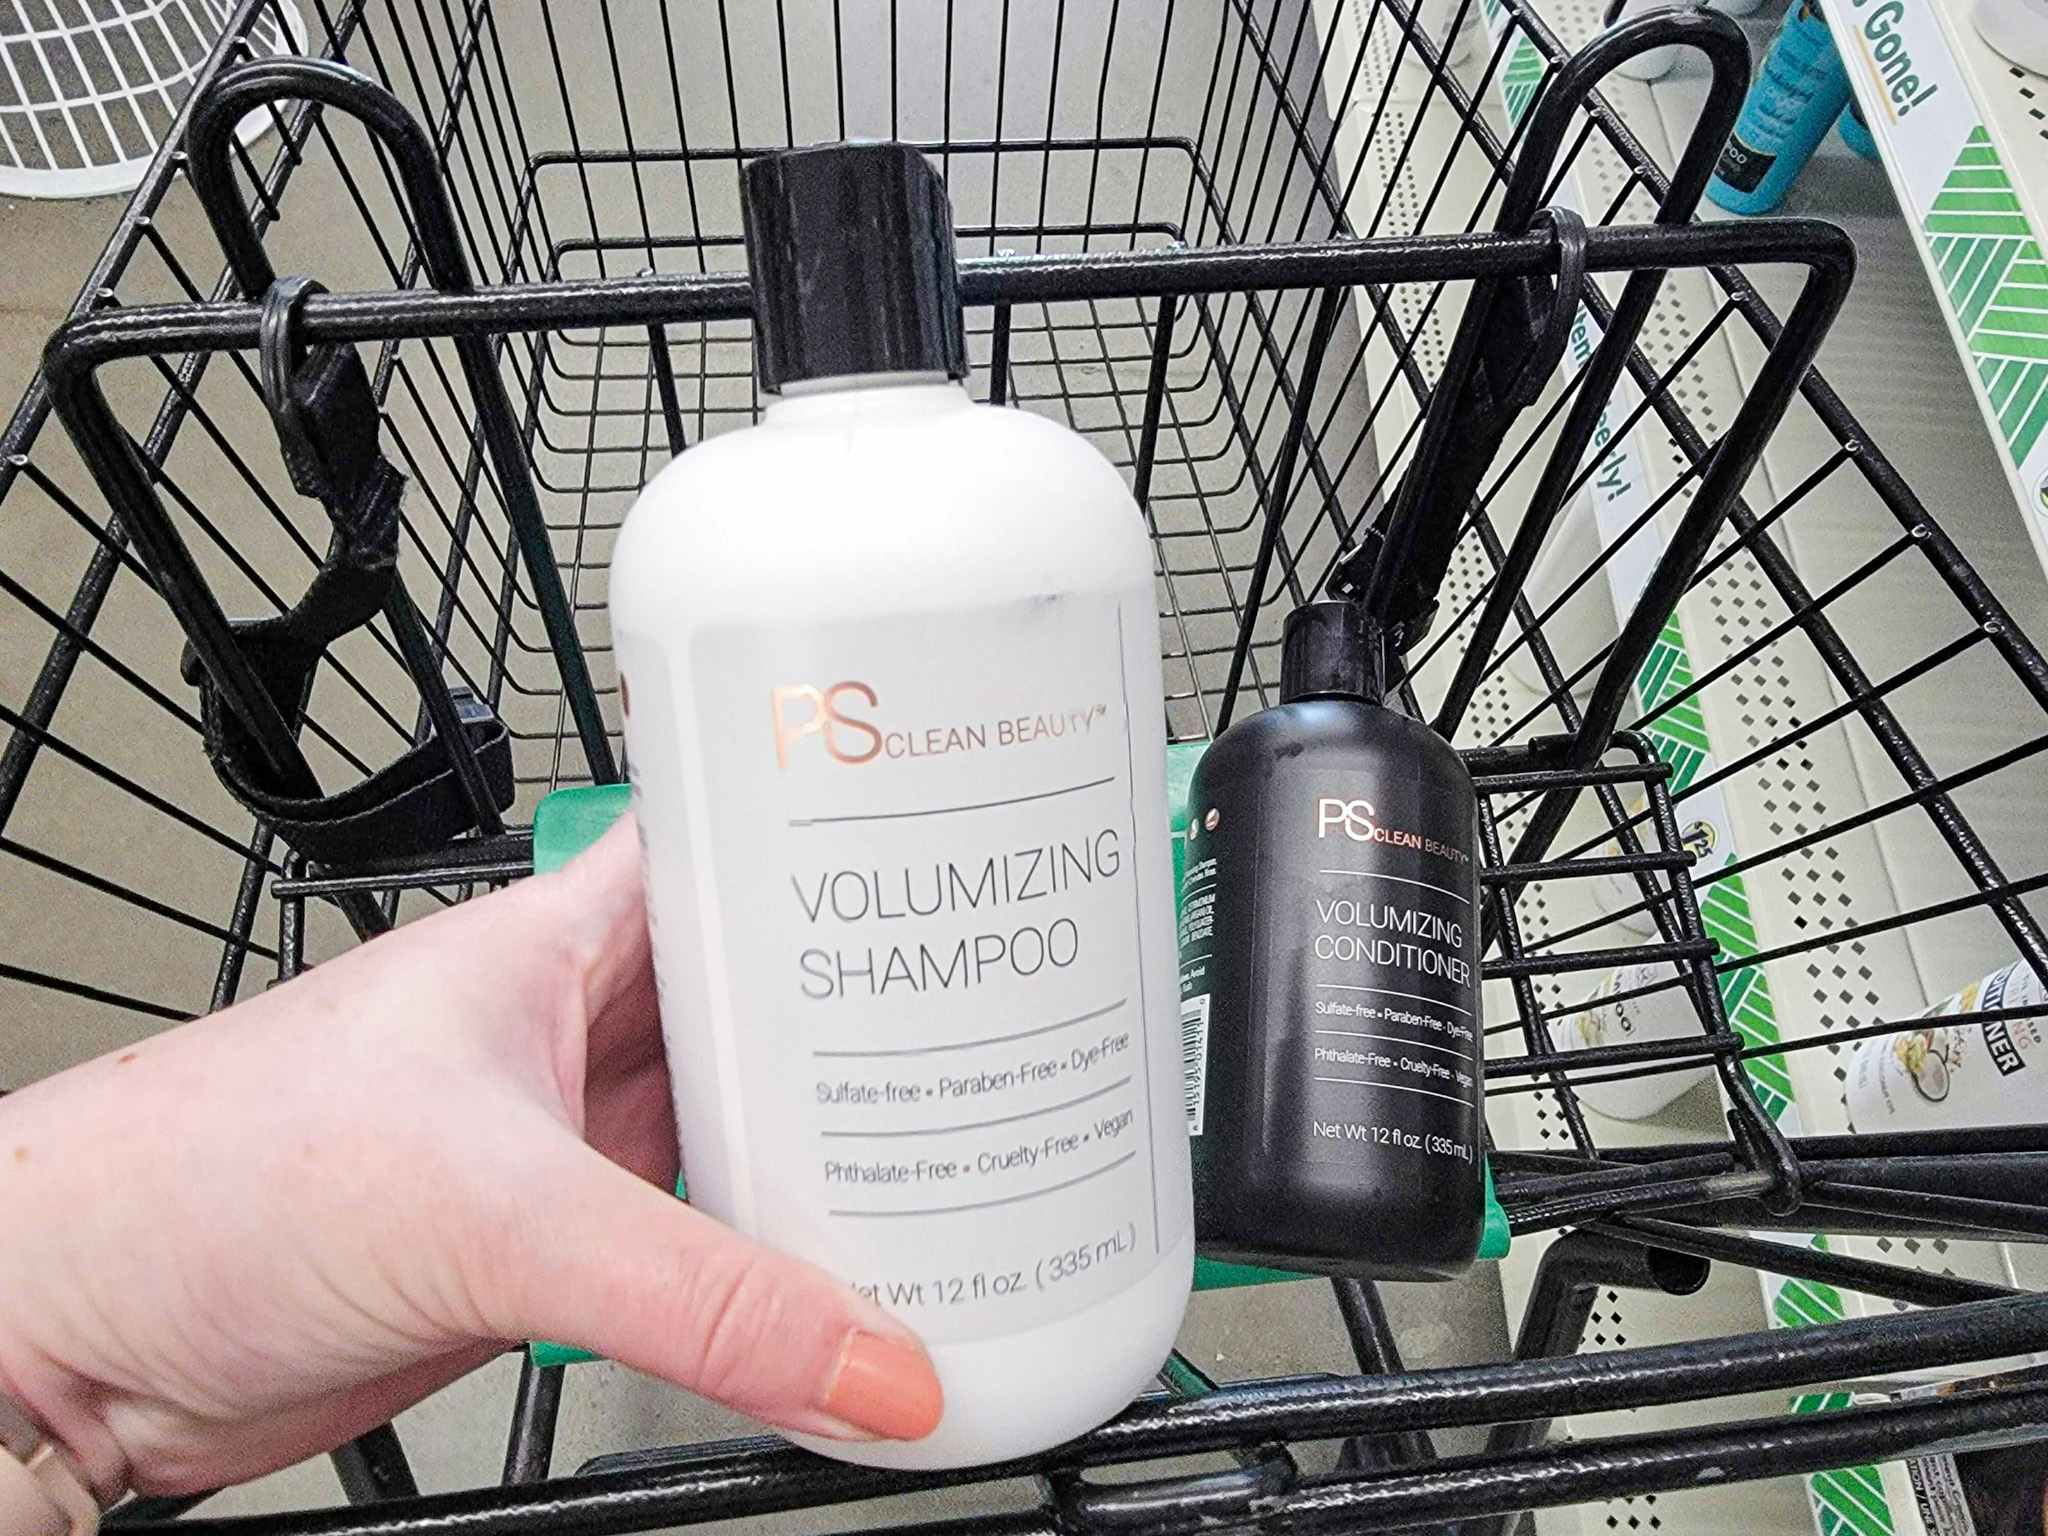 clean beauty shampoo & conditioner in a cart